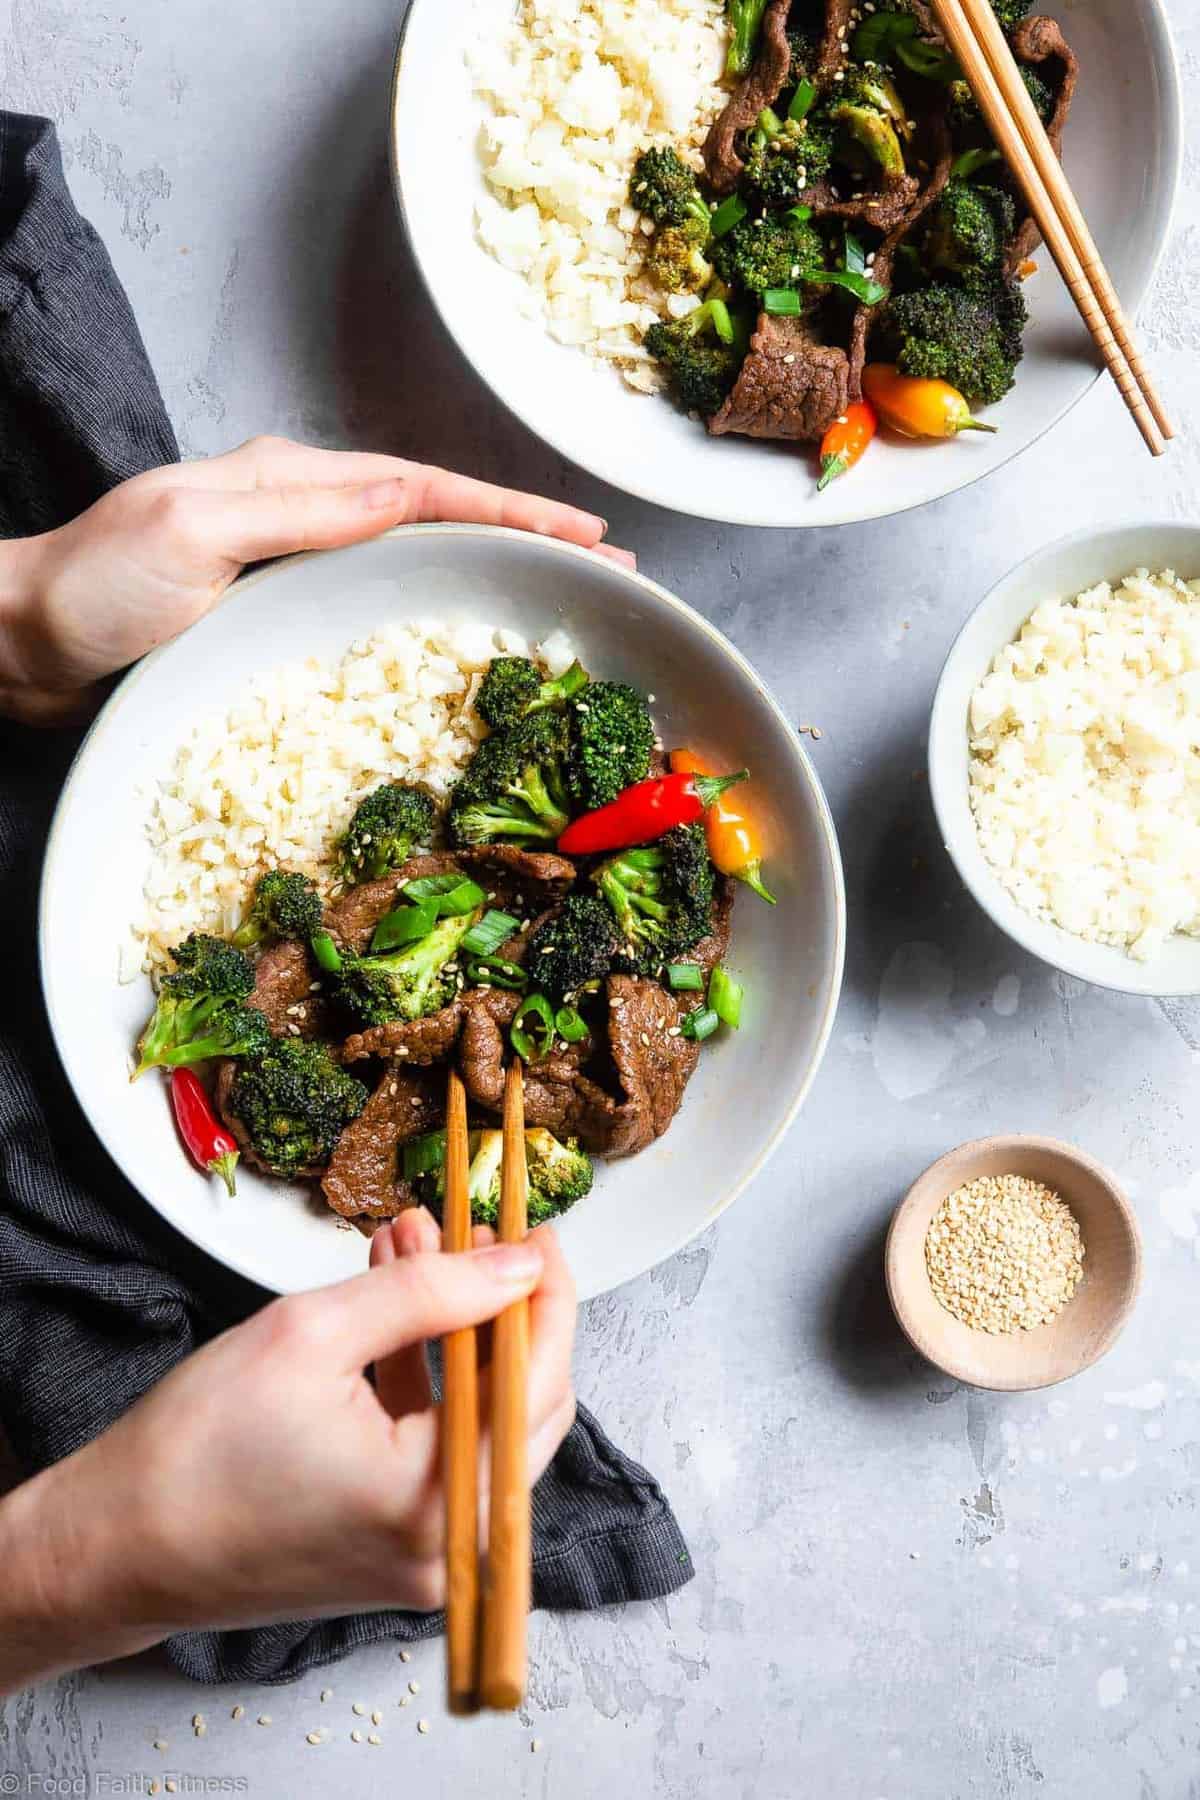 Easy Whole30 Low Carb Beef and Broccoli - This keto stir fry is an EASY, one-pot weeknight meal that even picky eaters will love! So much yummier and healthier than takeout too! | #Foodfaithfitness | 